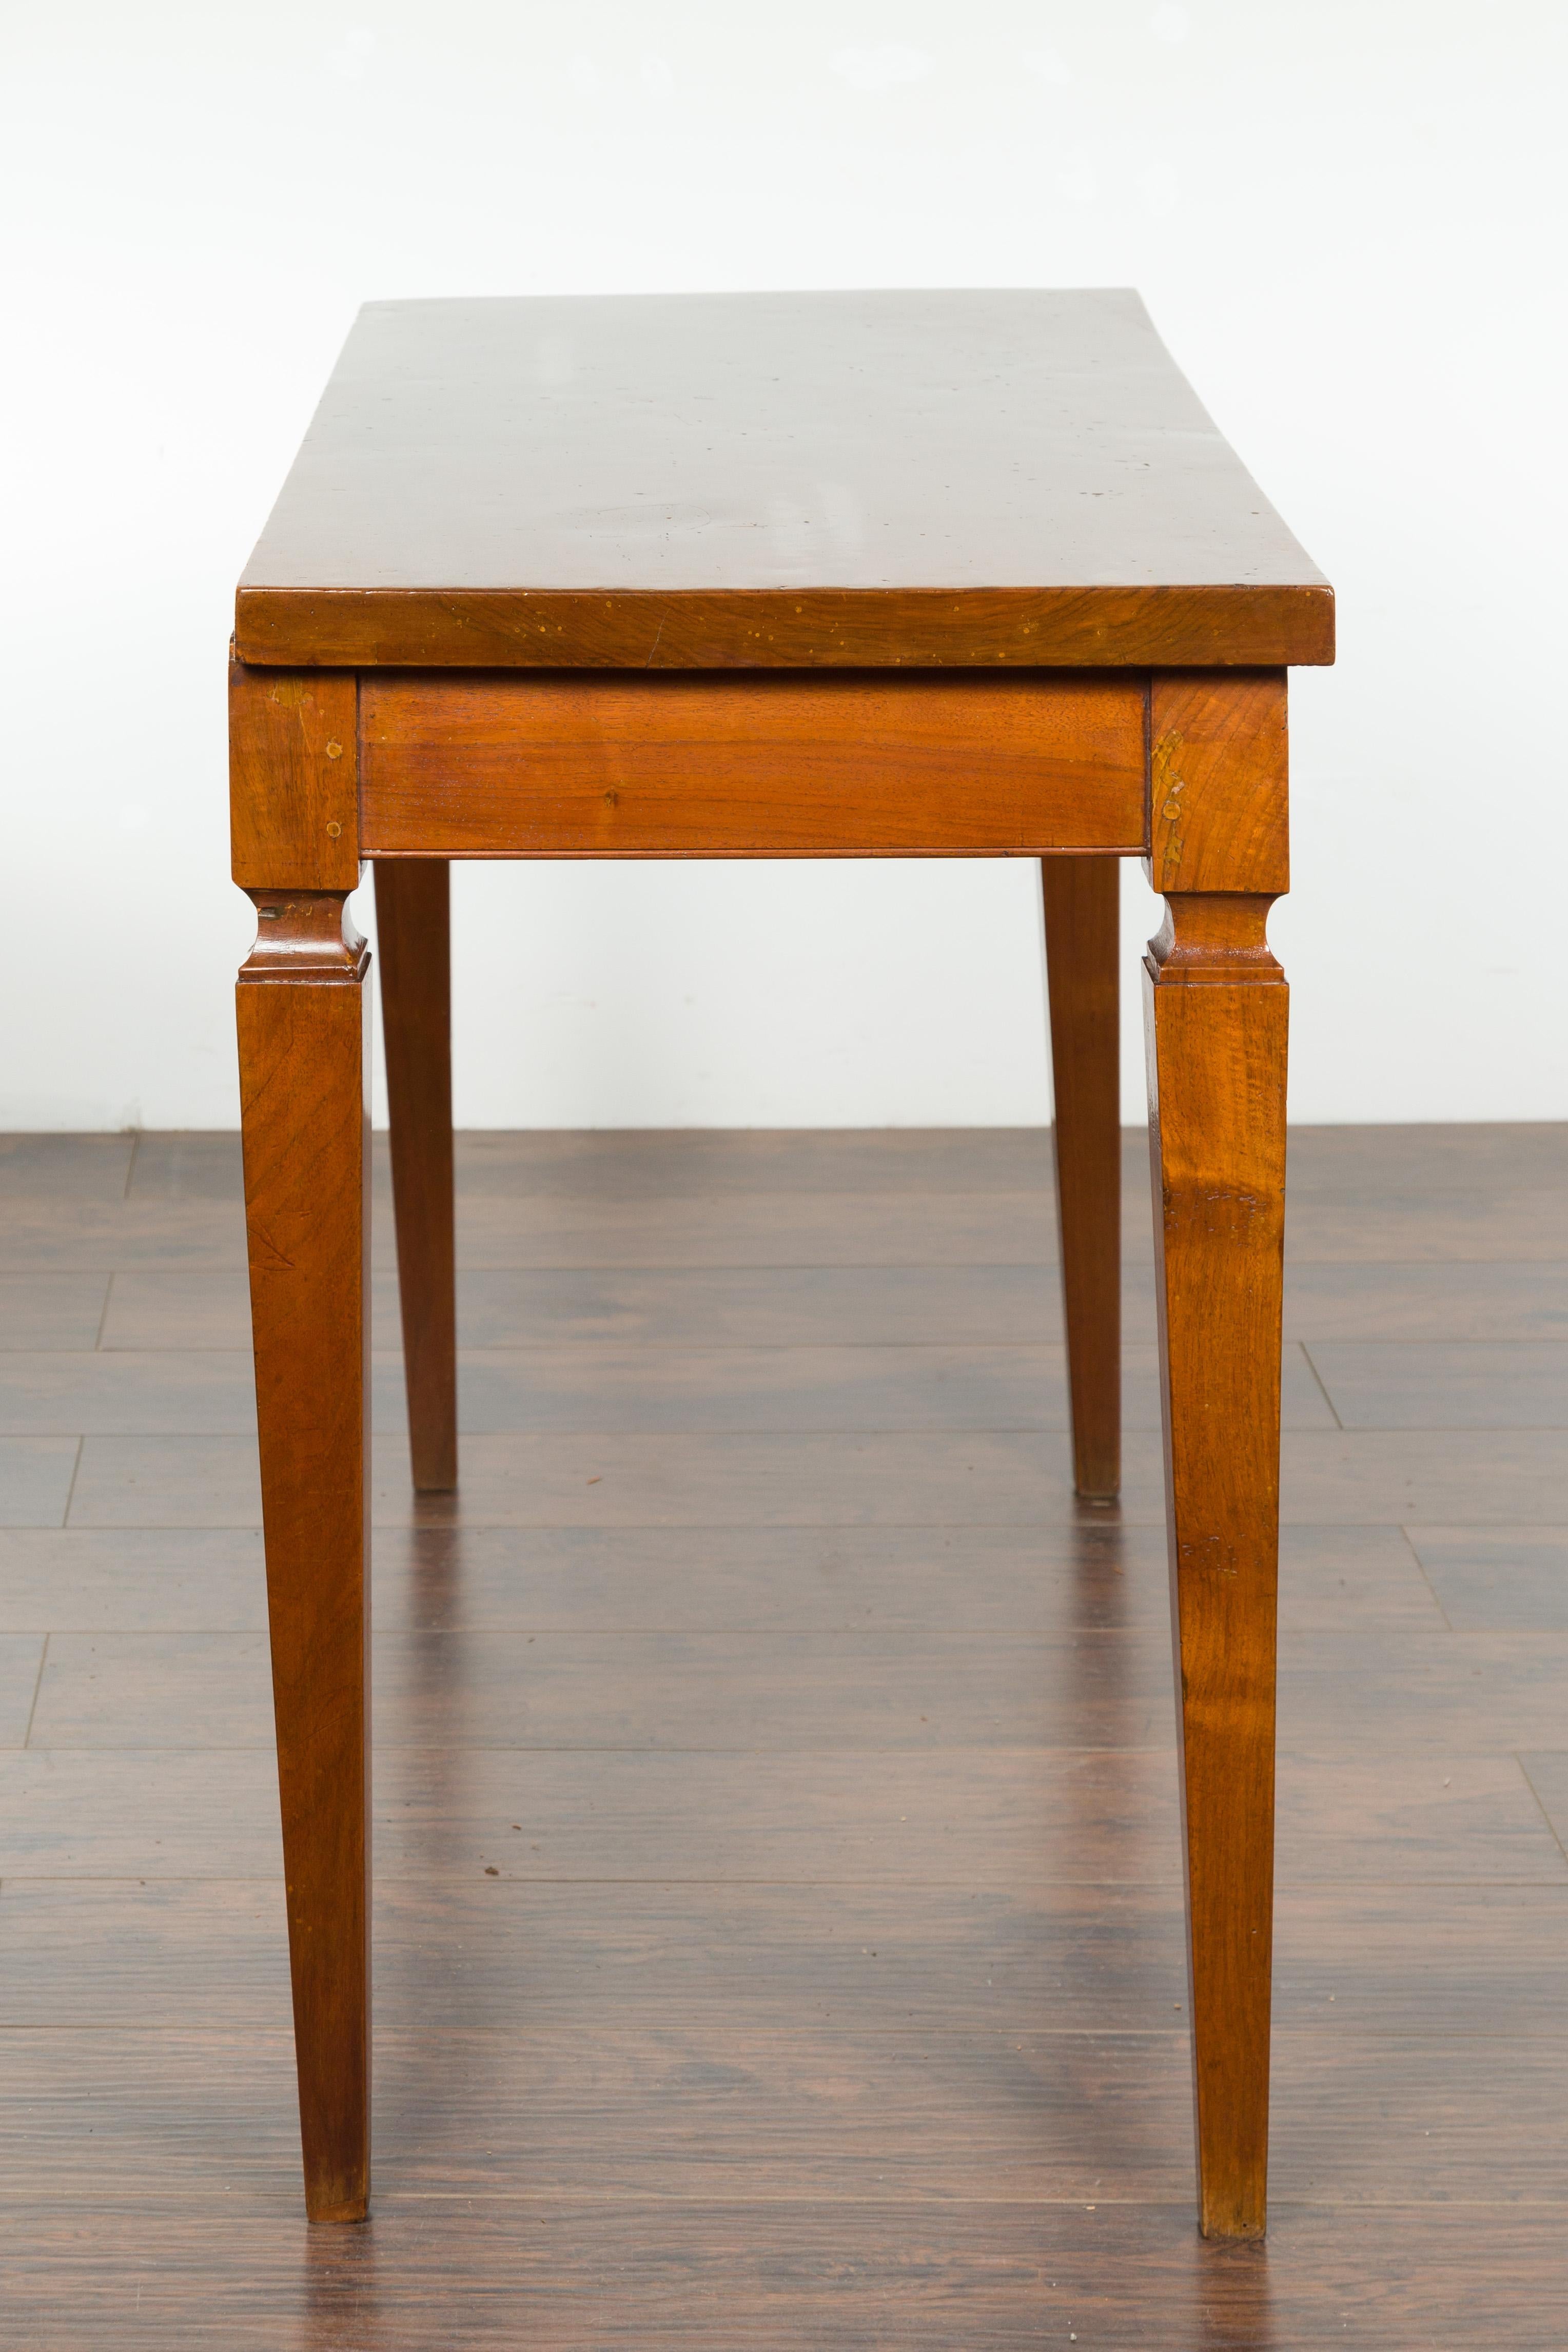 Italian 19th Century Walnut Desk with Single Drawer and Tapered Legs For Sale 8